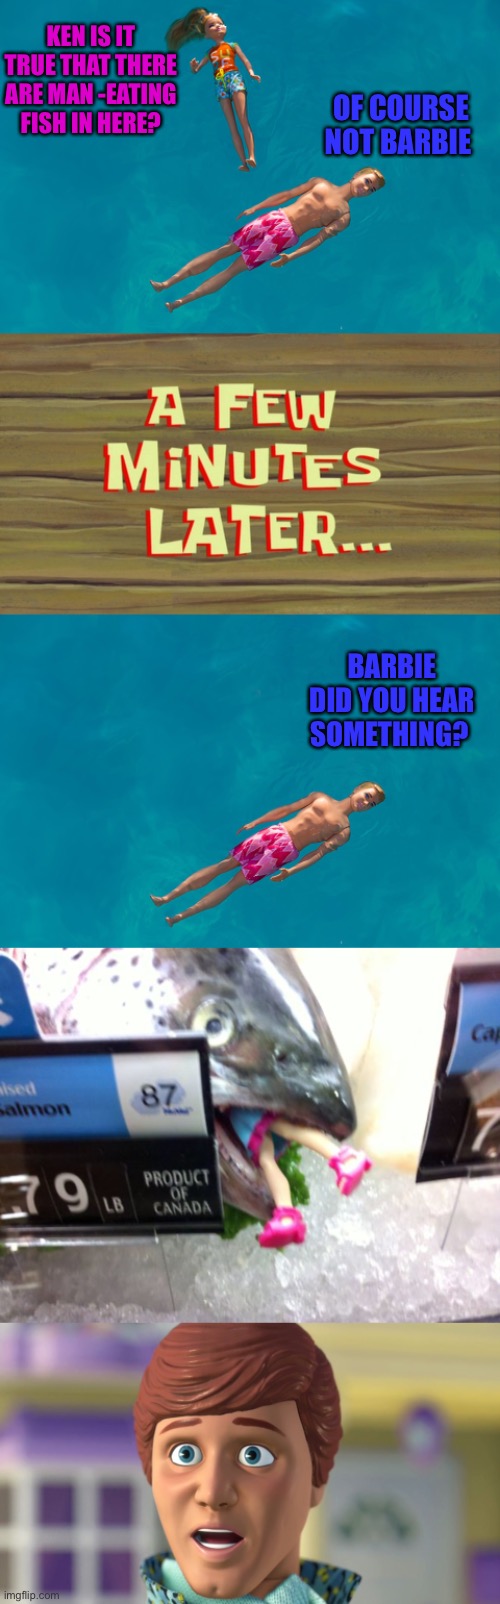 Something Fishy... | KEN IS IT TRUE THAT THERE ARE MAN -EATING FISH IN HERE? OF COURSE NOT BARBIE; BARBIE DID YOU HEAR SOMETHING? | image tagged in memes,barbie,ken and barbie,disney,44colt,pixar | made w/ Imgflip meme maker